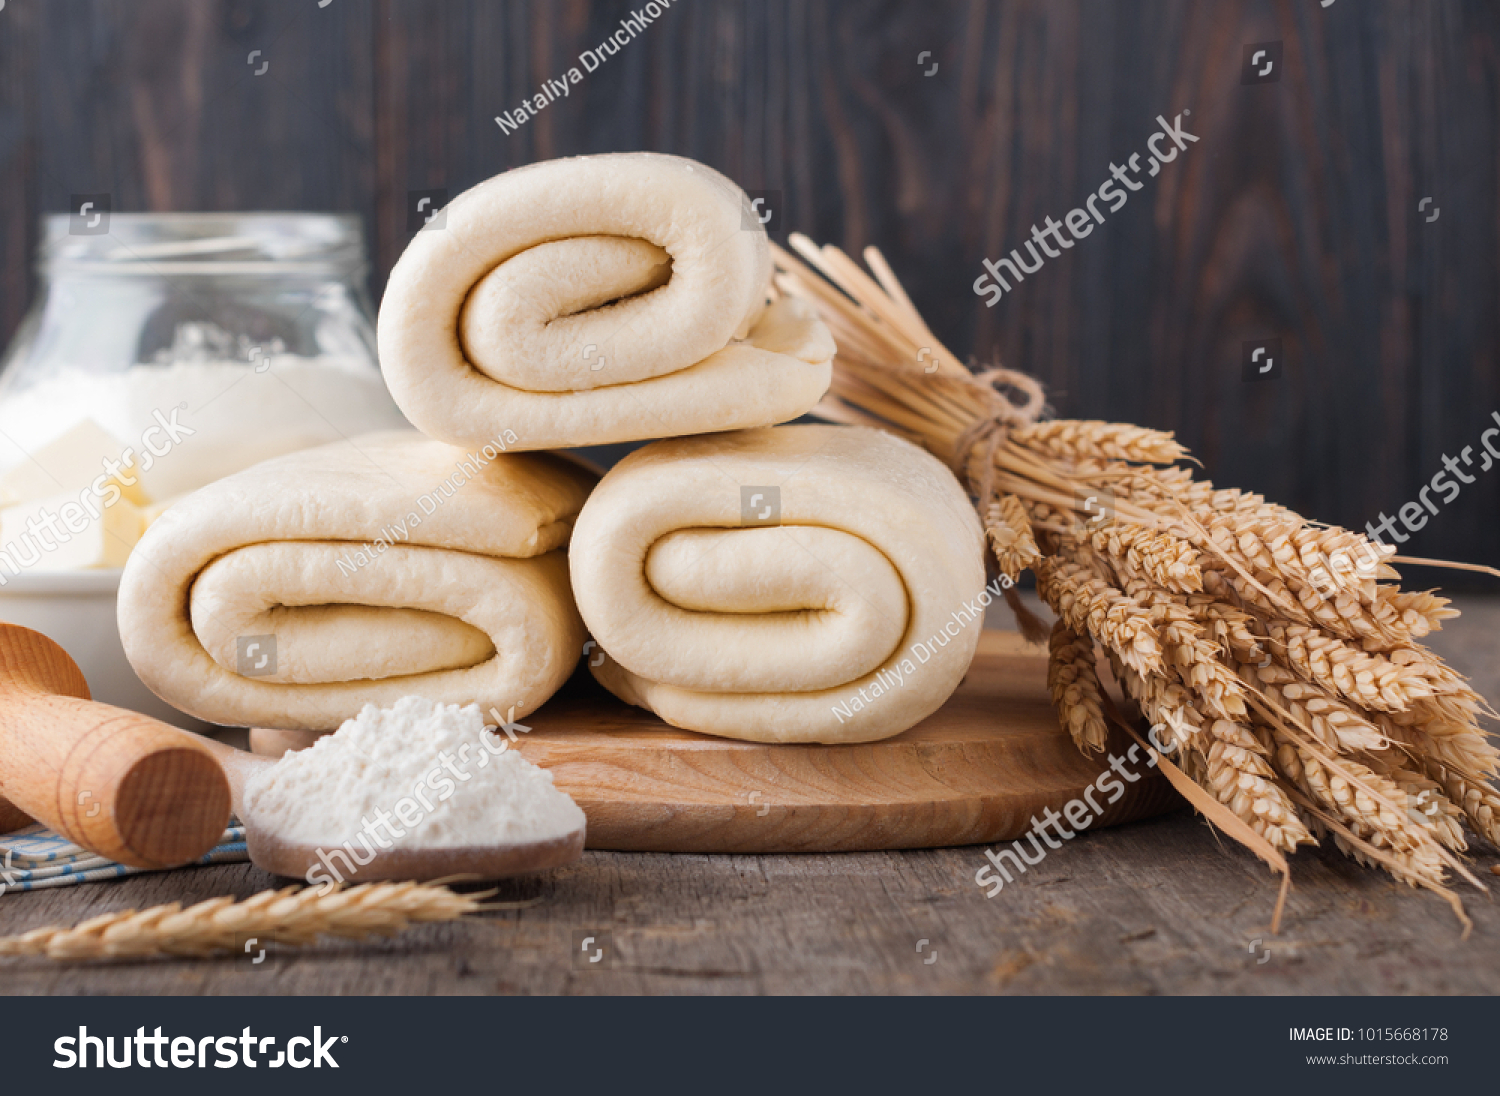 Puff pastry dough. Homemade folded raw puff pastry on a wooden cutting board on a rustic wooden surface (table). Making puff pastry. Dough's rolls with a rolling pin, flour, butter, wheat spikelets. #1015668178